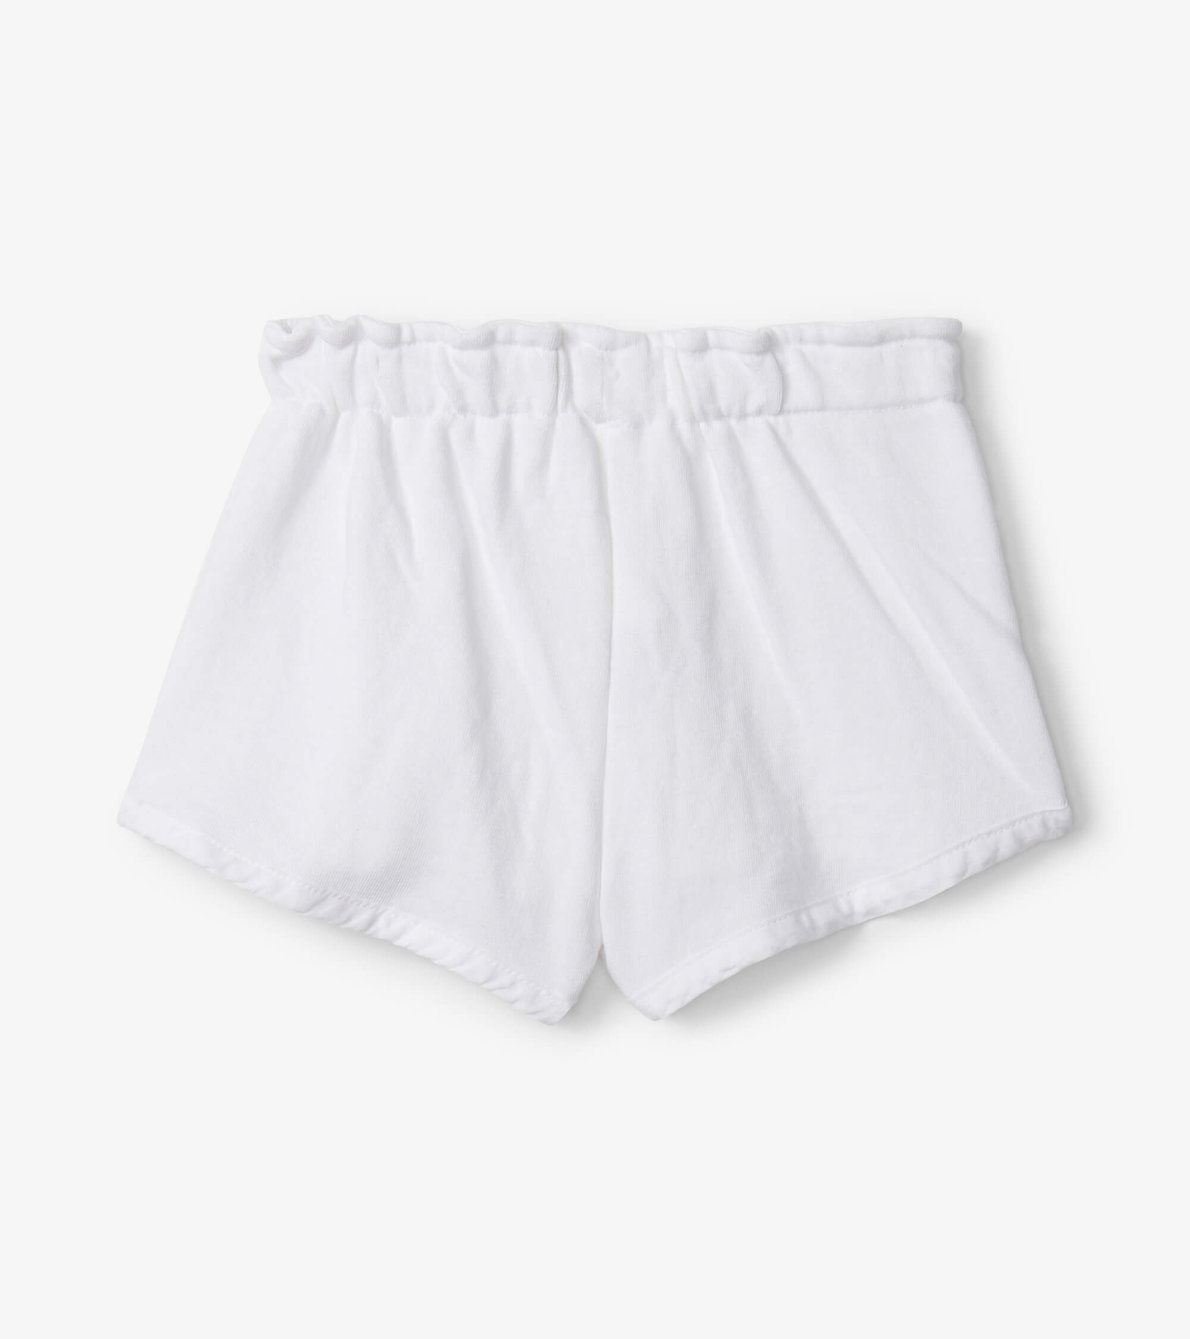 View larger image of Girls White Adventure Shorts